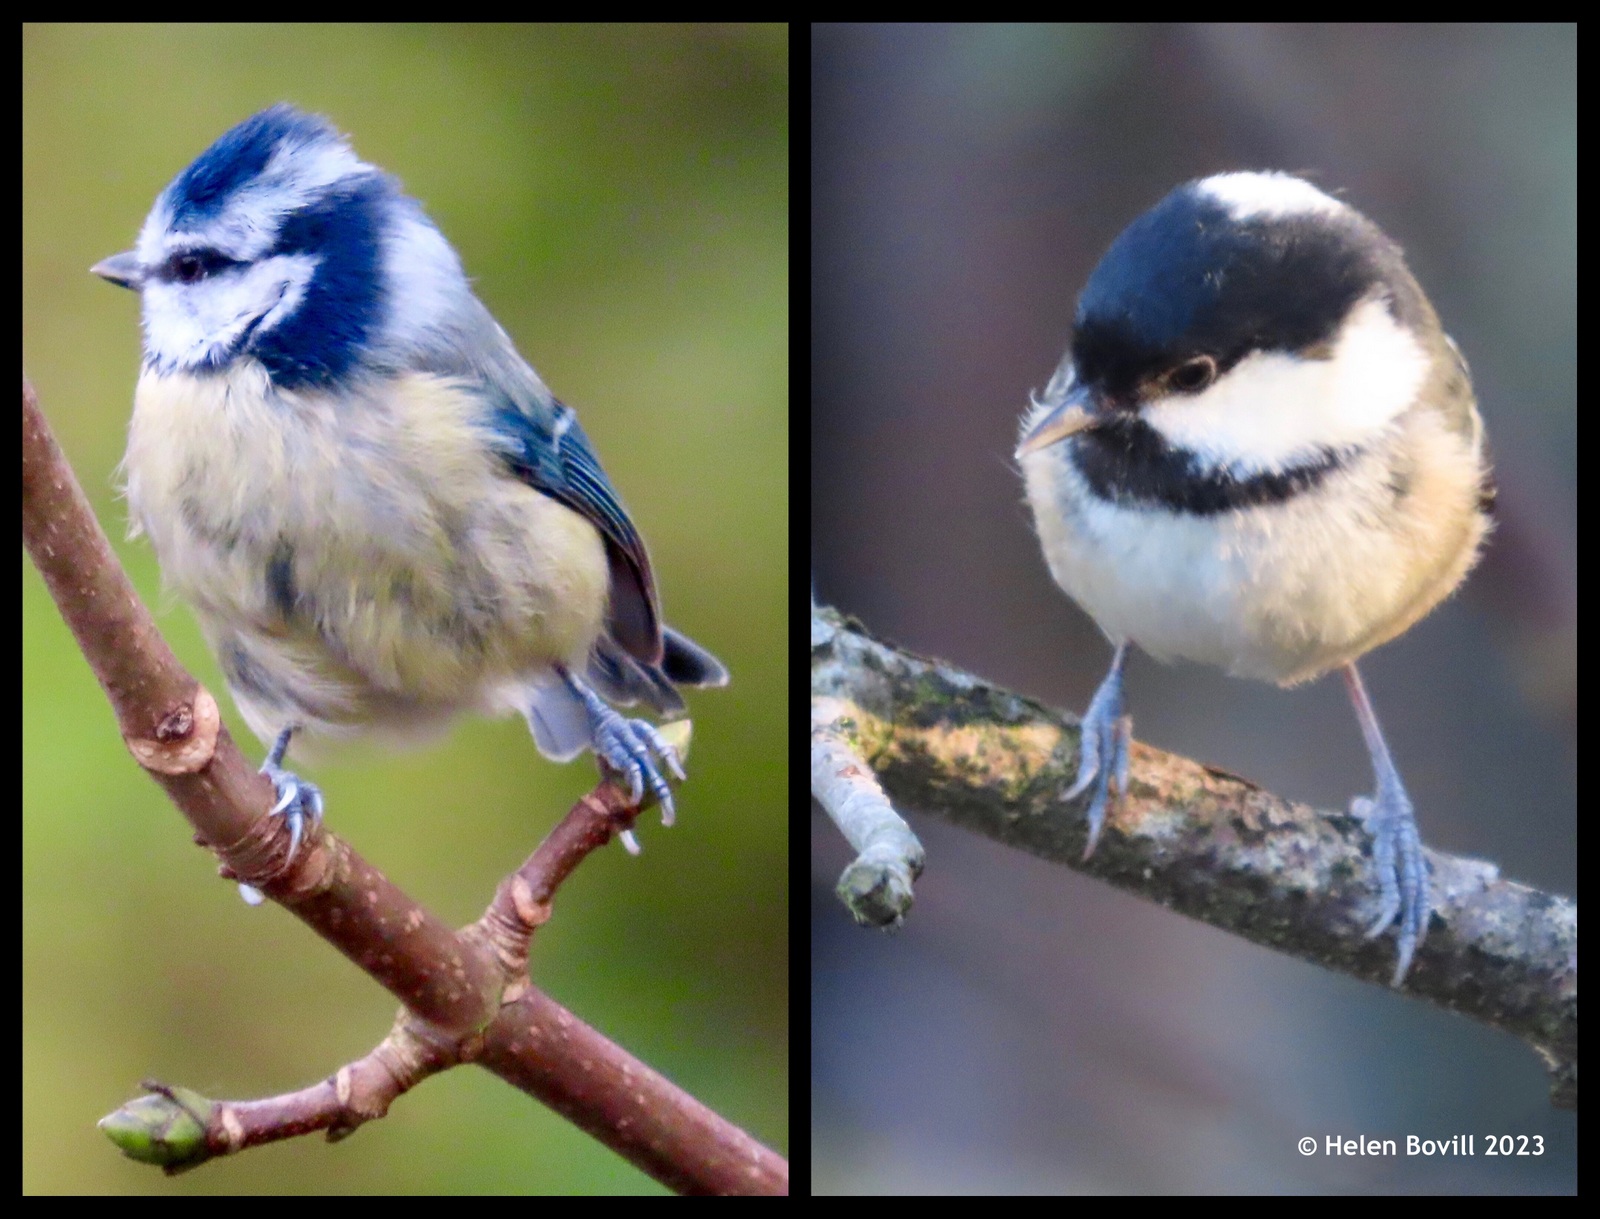 Two photos, one showing a blue tit and the other showing a coal tit